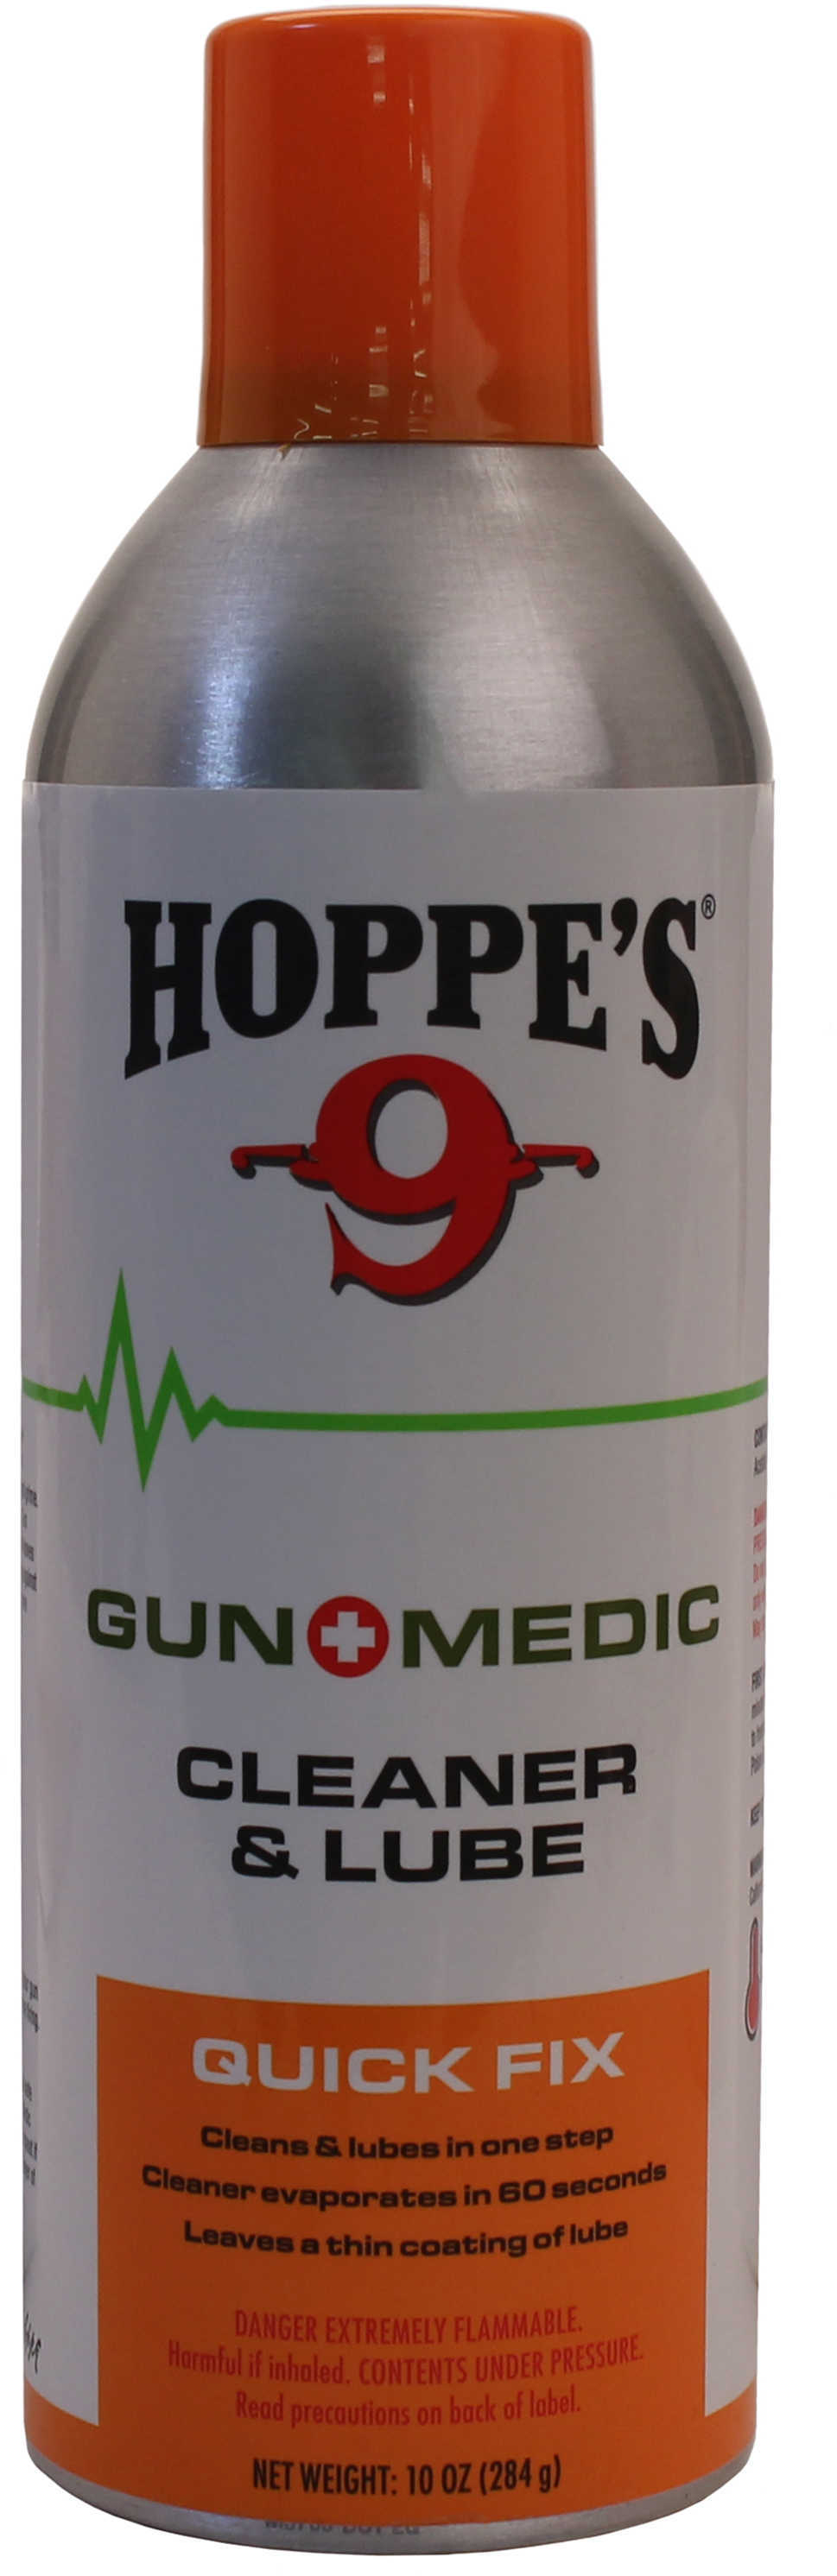 Hoppes GM2 Gun Medic Cleaner and Lube Universal